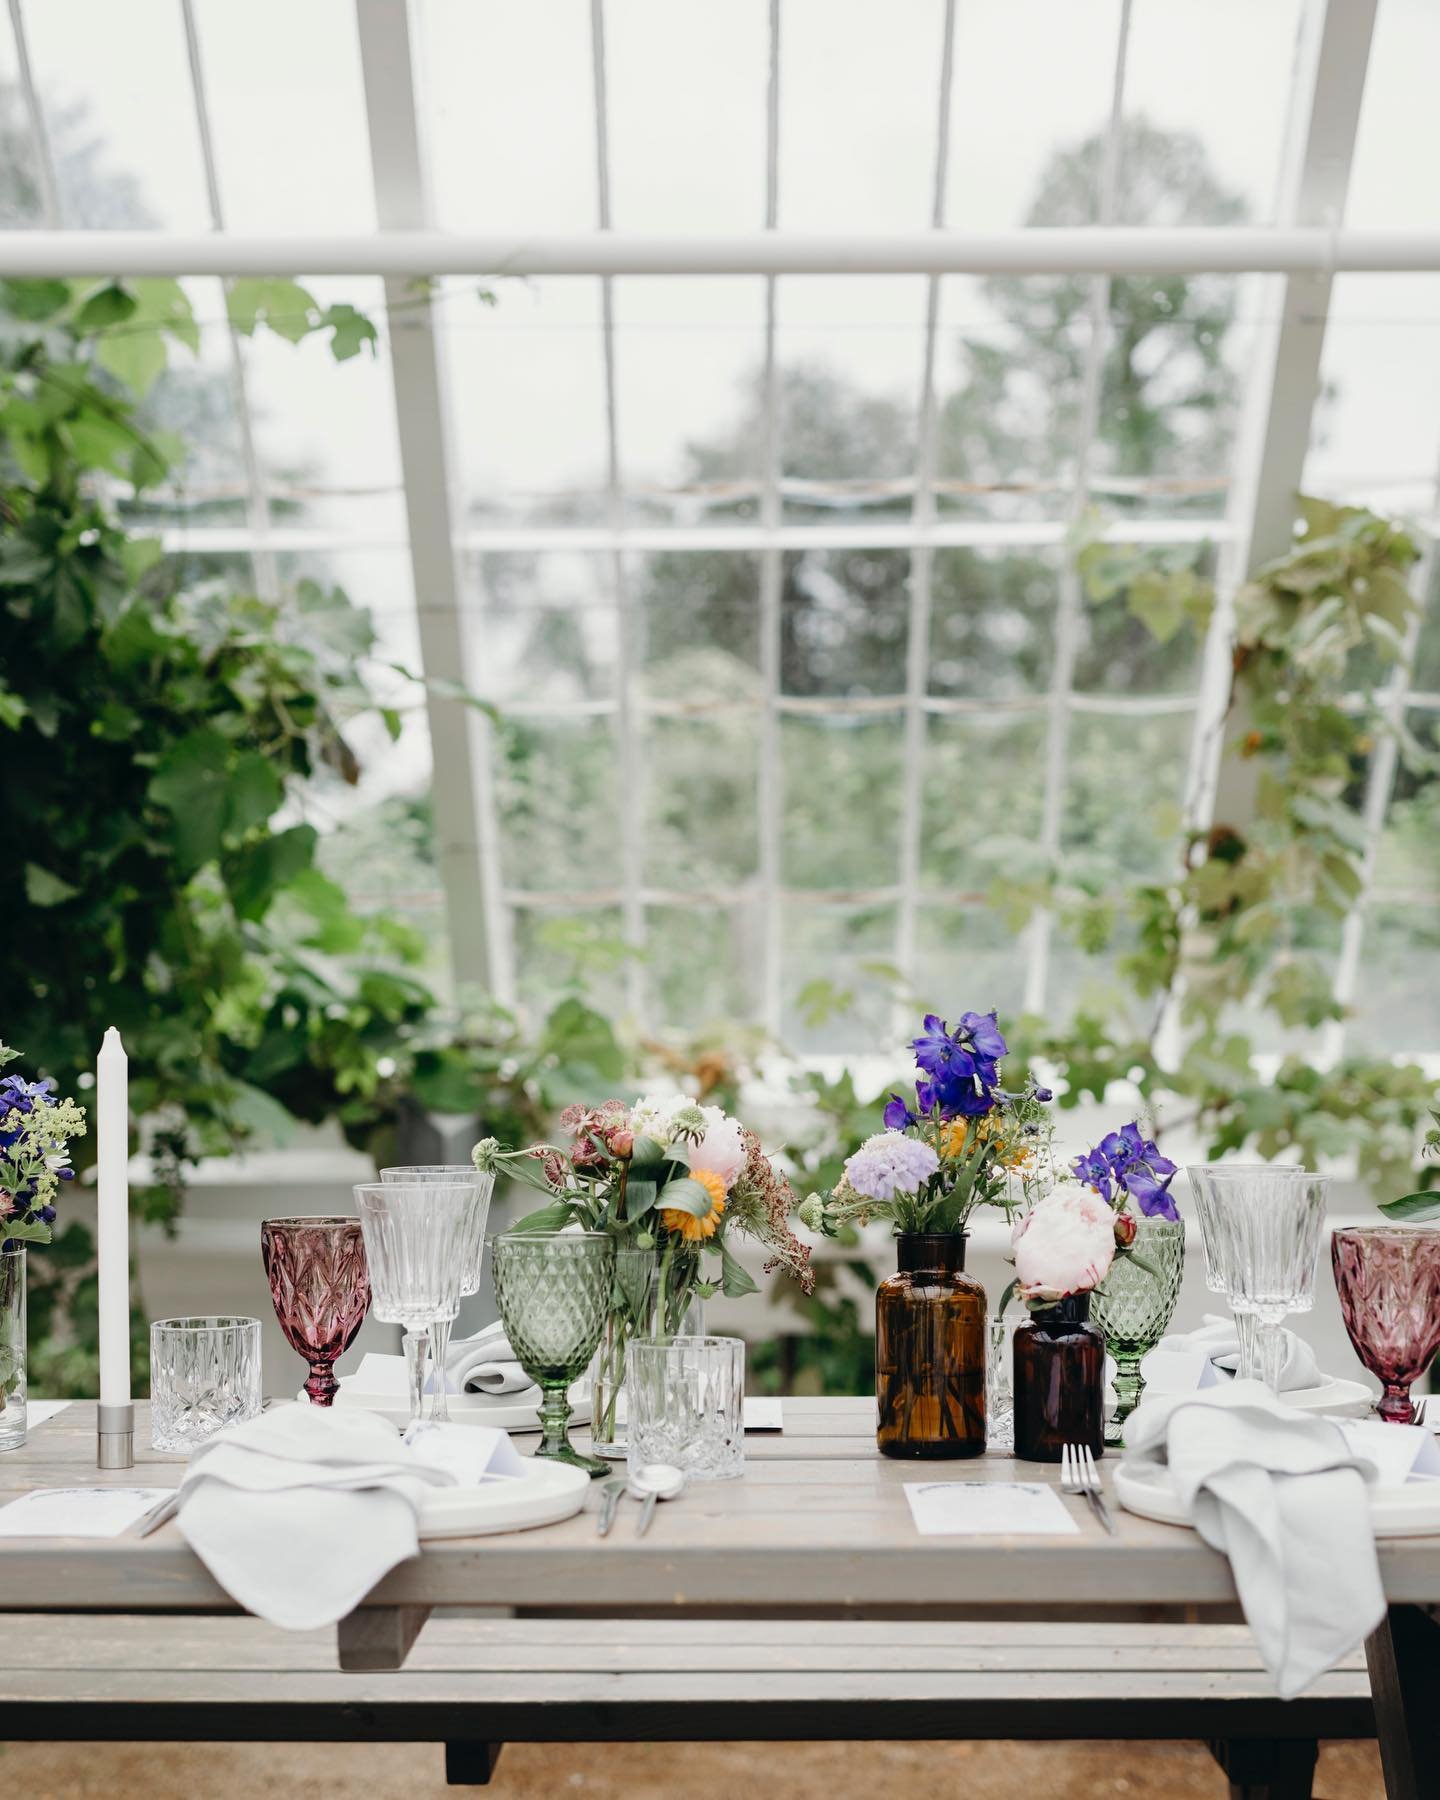 Throwback to this enchanting greenhouse setting! 🌿💐 As wedding season beckons, we&rsquo;re eagerly anticipating more projects and weddings as inspiring as this one. We can&rsquo;t wait to create magical moments together amidst the beauty of floral 